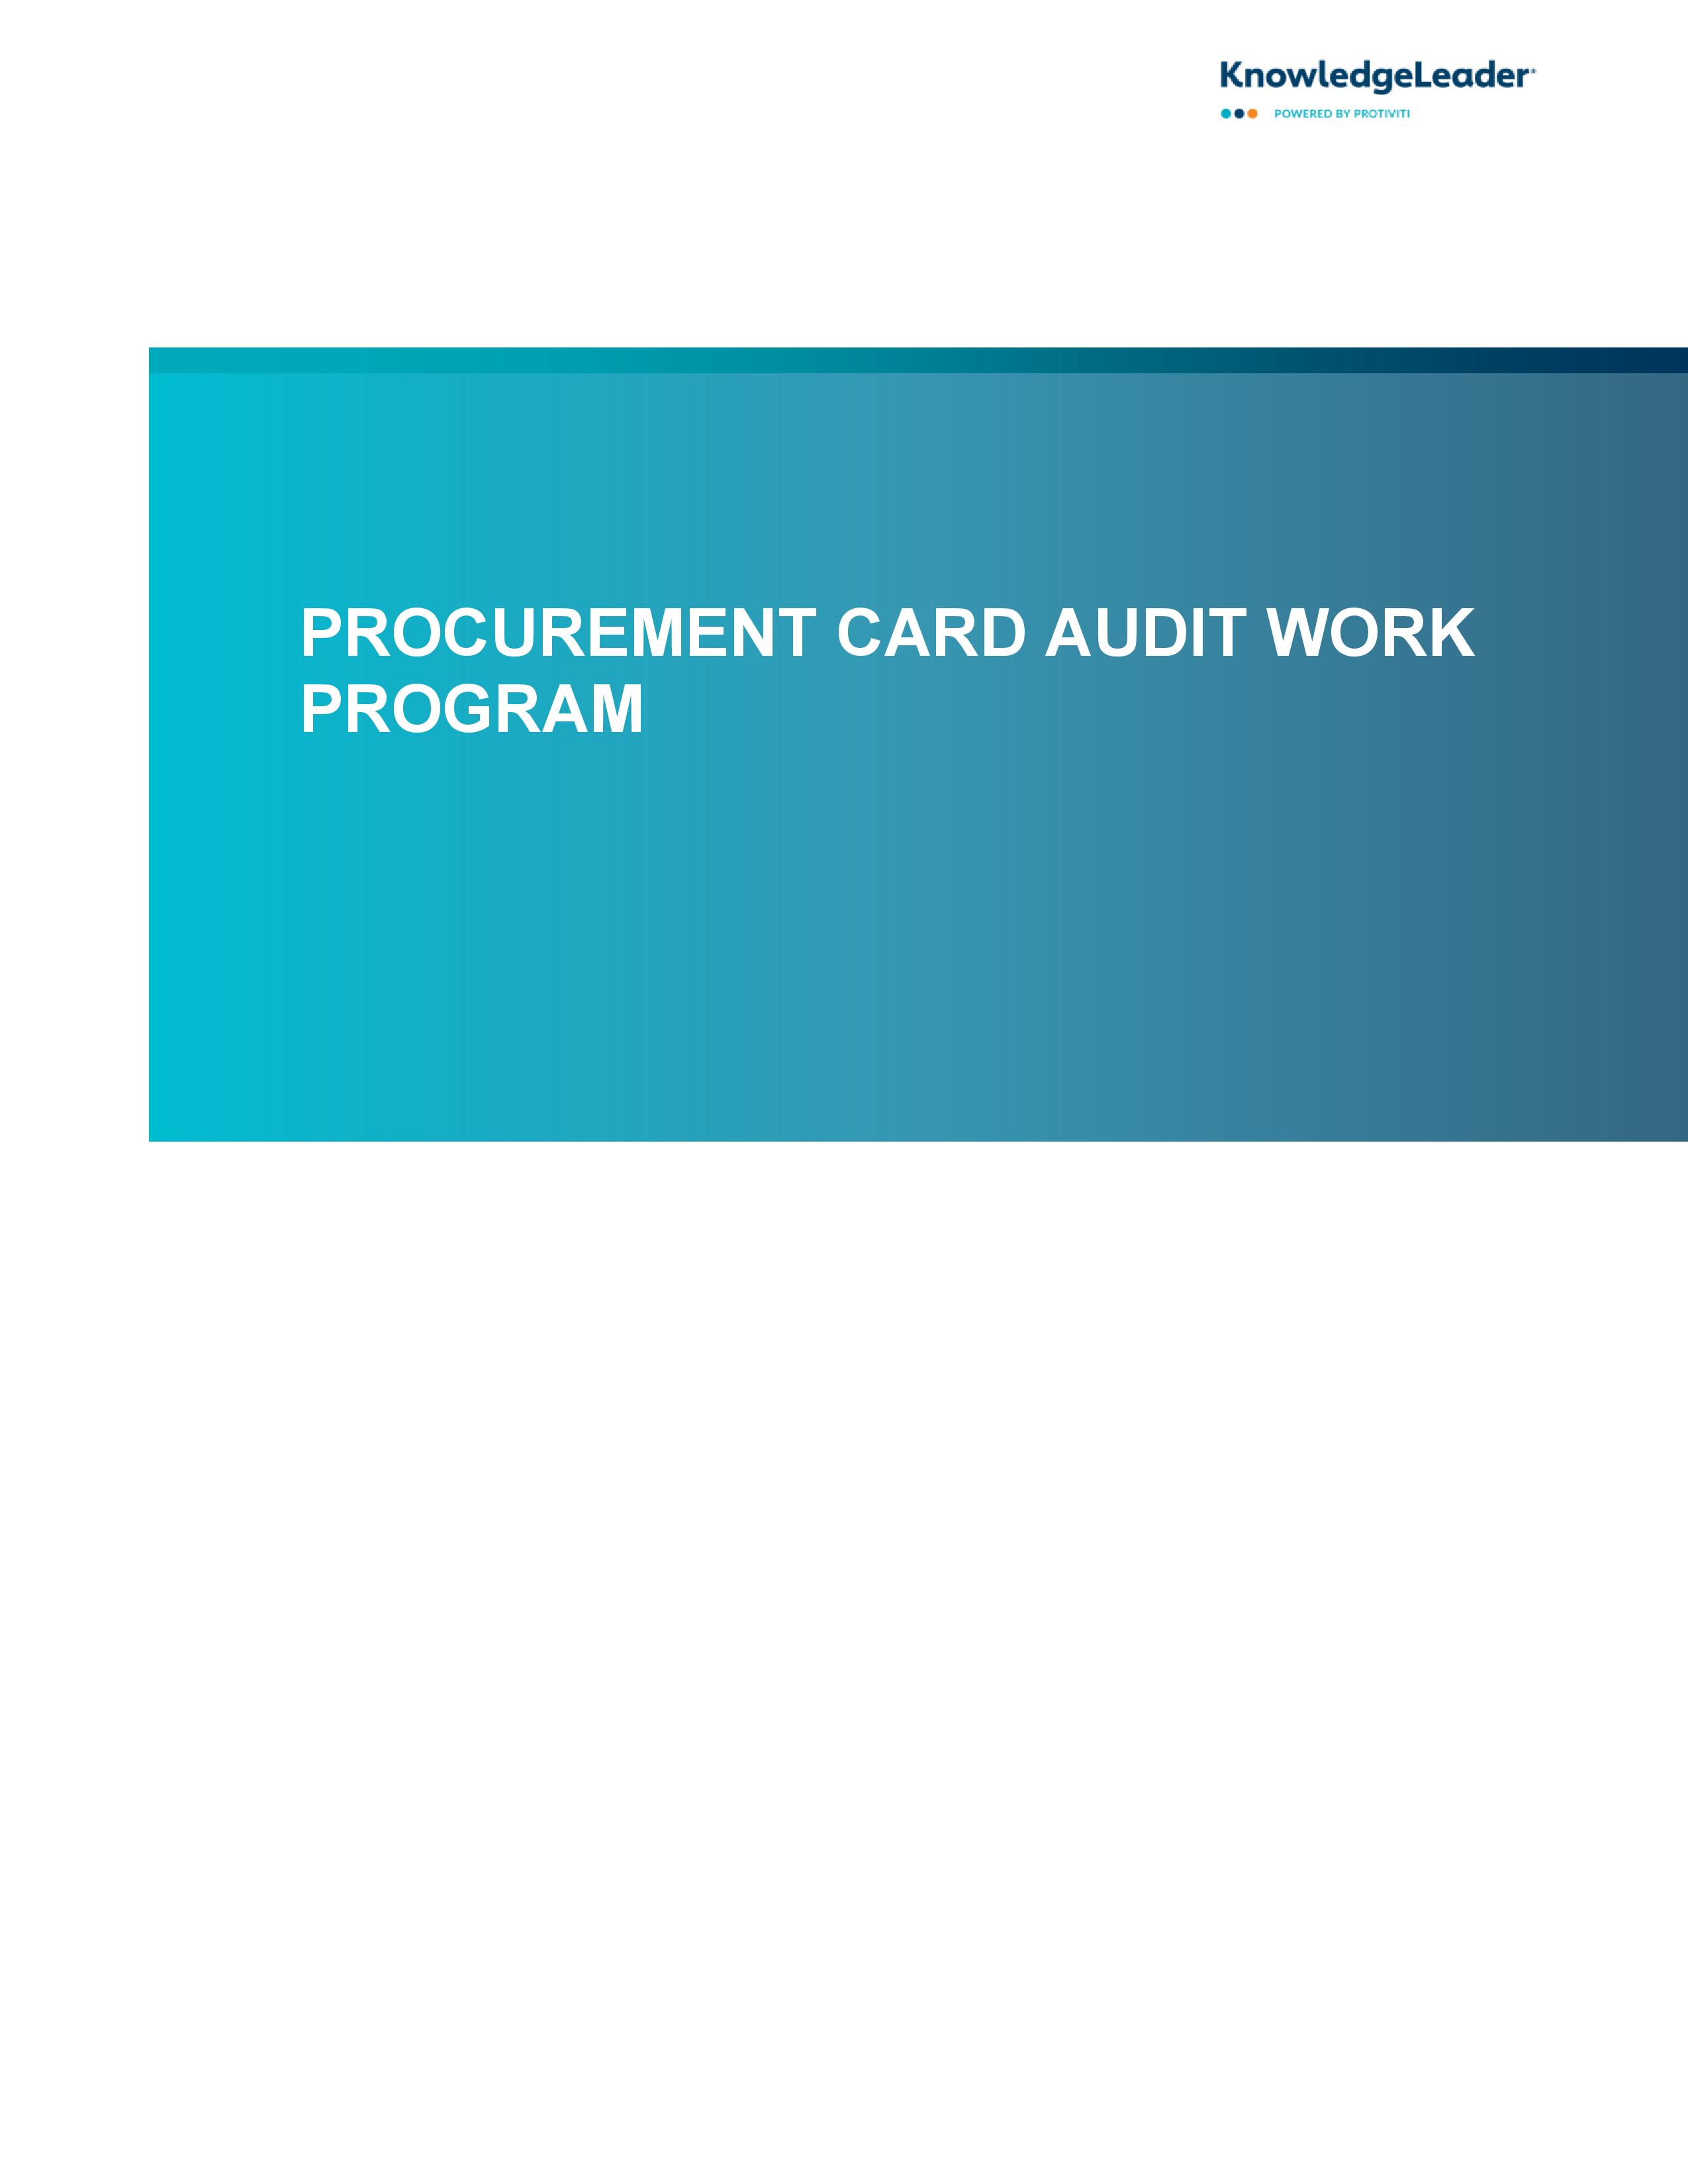 screenshot of the first page of Procurement Card Audit Work Program